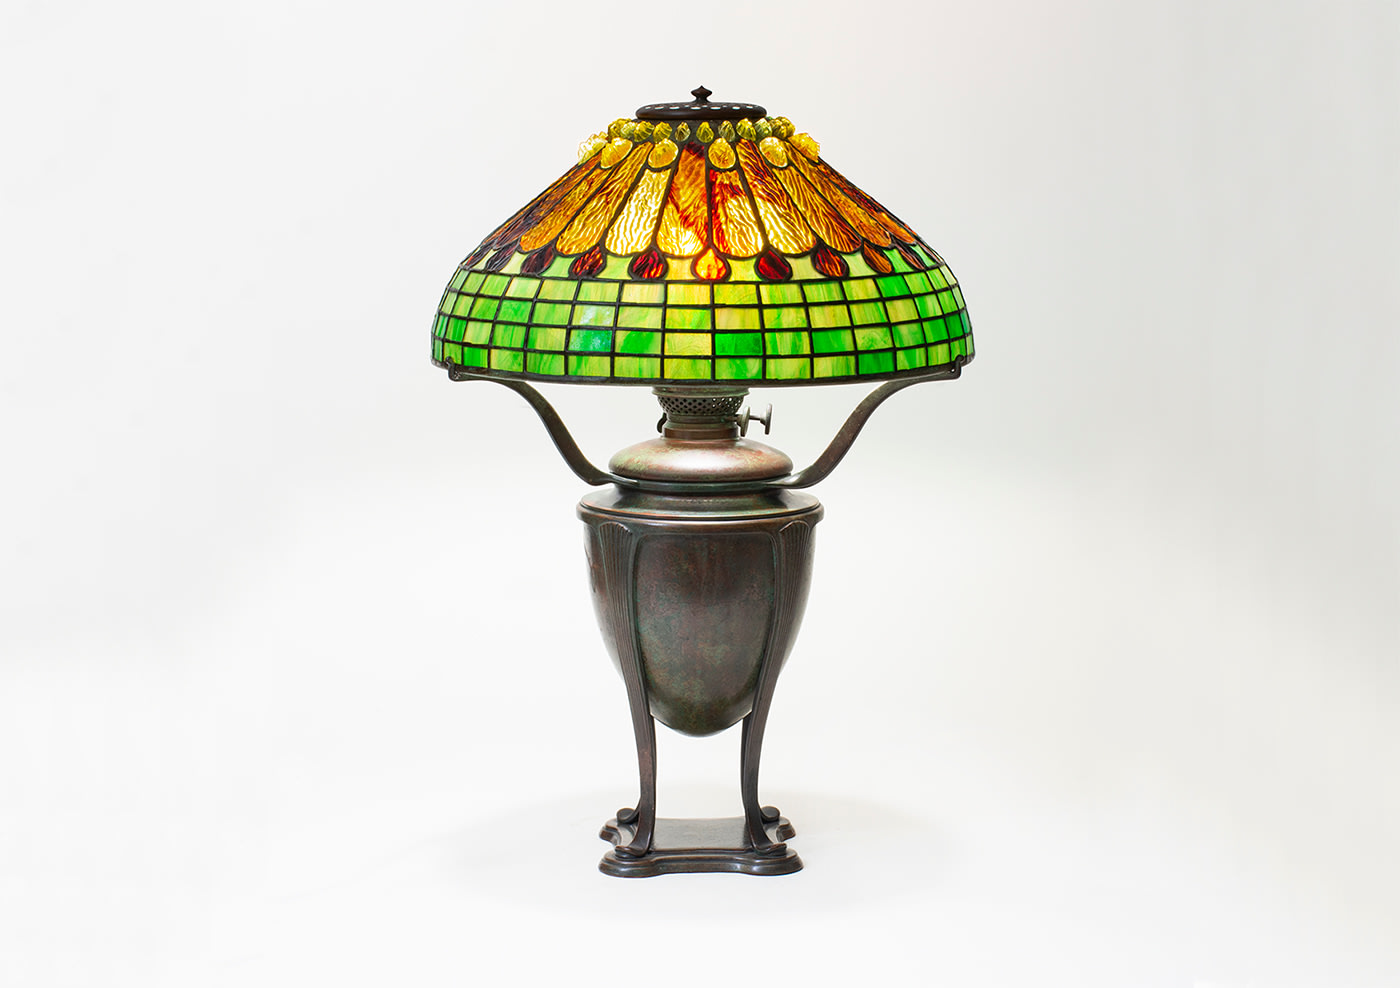 an early tiffany lamp with geometric shade formed by panels of &quot;rippled&quot; tiffany glass in shades of amber and deep orange-red with the ripples arranged so that the shade resembles the feathers of a bird, the crown of the shade with pressed tiffany glass jewel &quot;chunks&quot;, on a bronze urn shaped base in rich brown-green patina